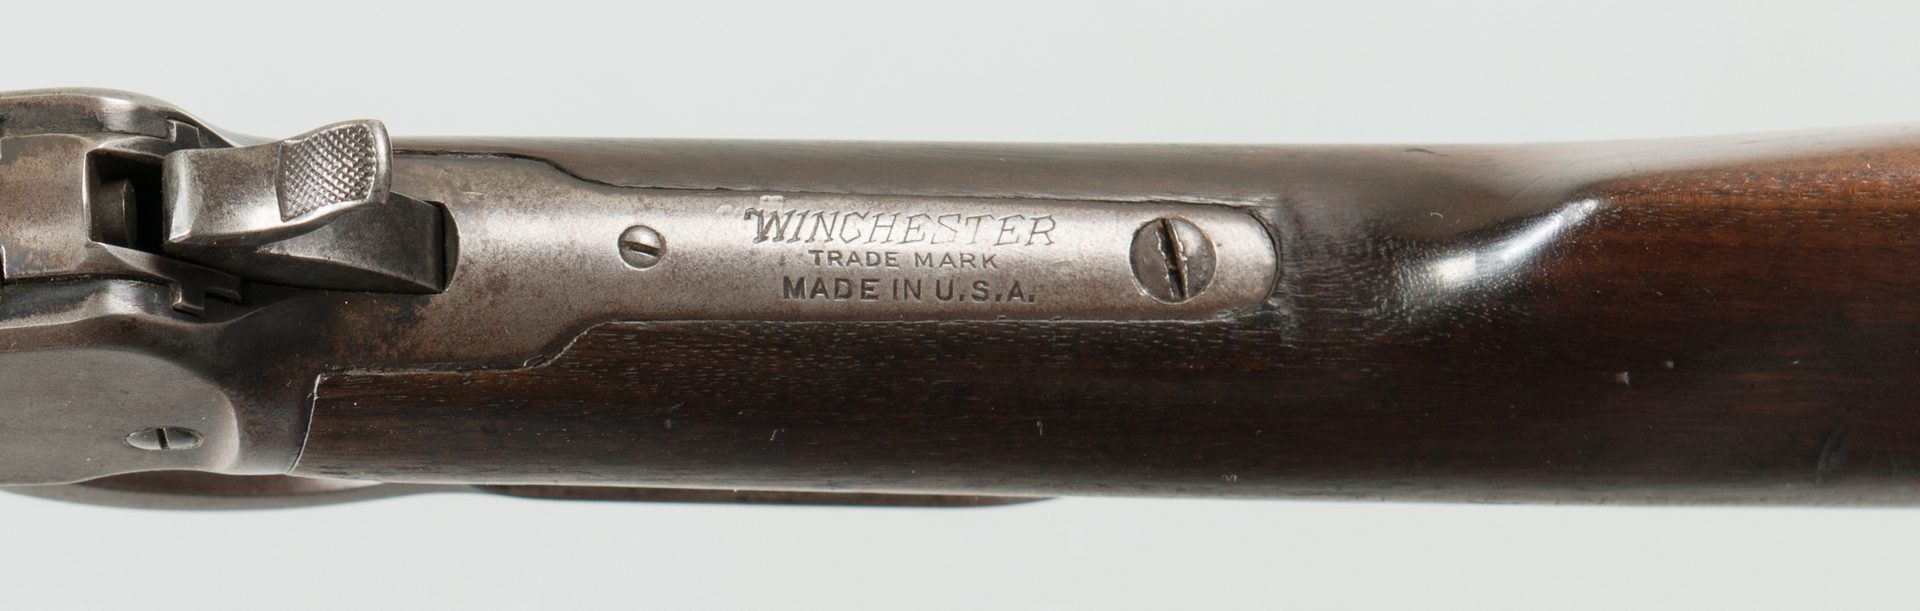 Lot 806: Winchester Model 92, 32-20 Win Lever Action Rifle